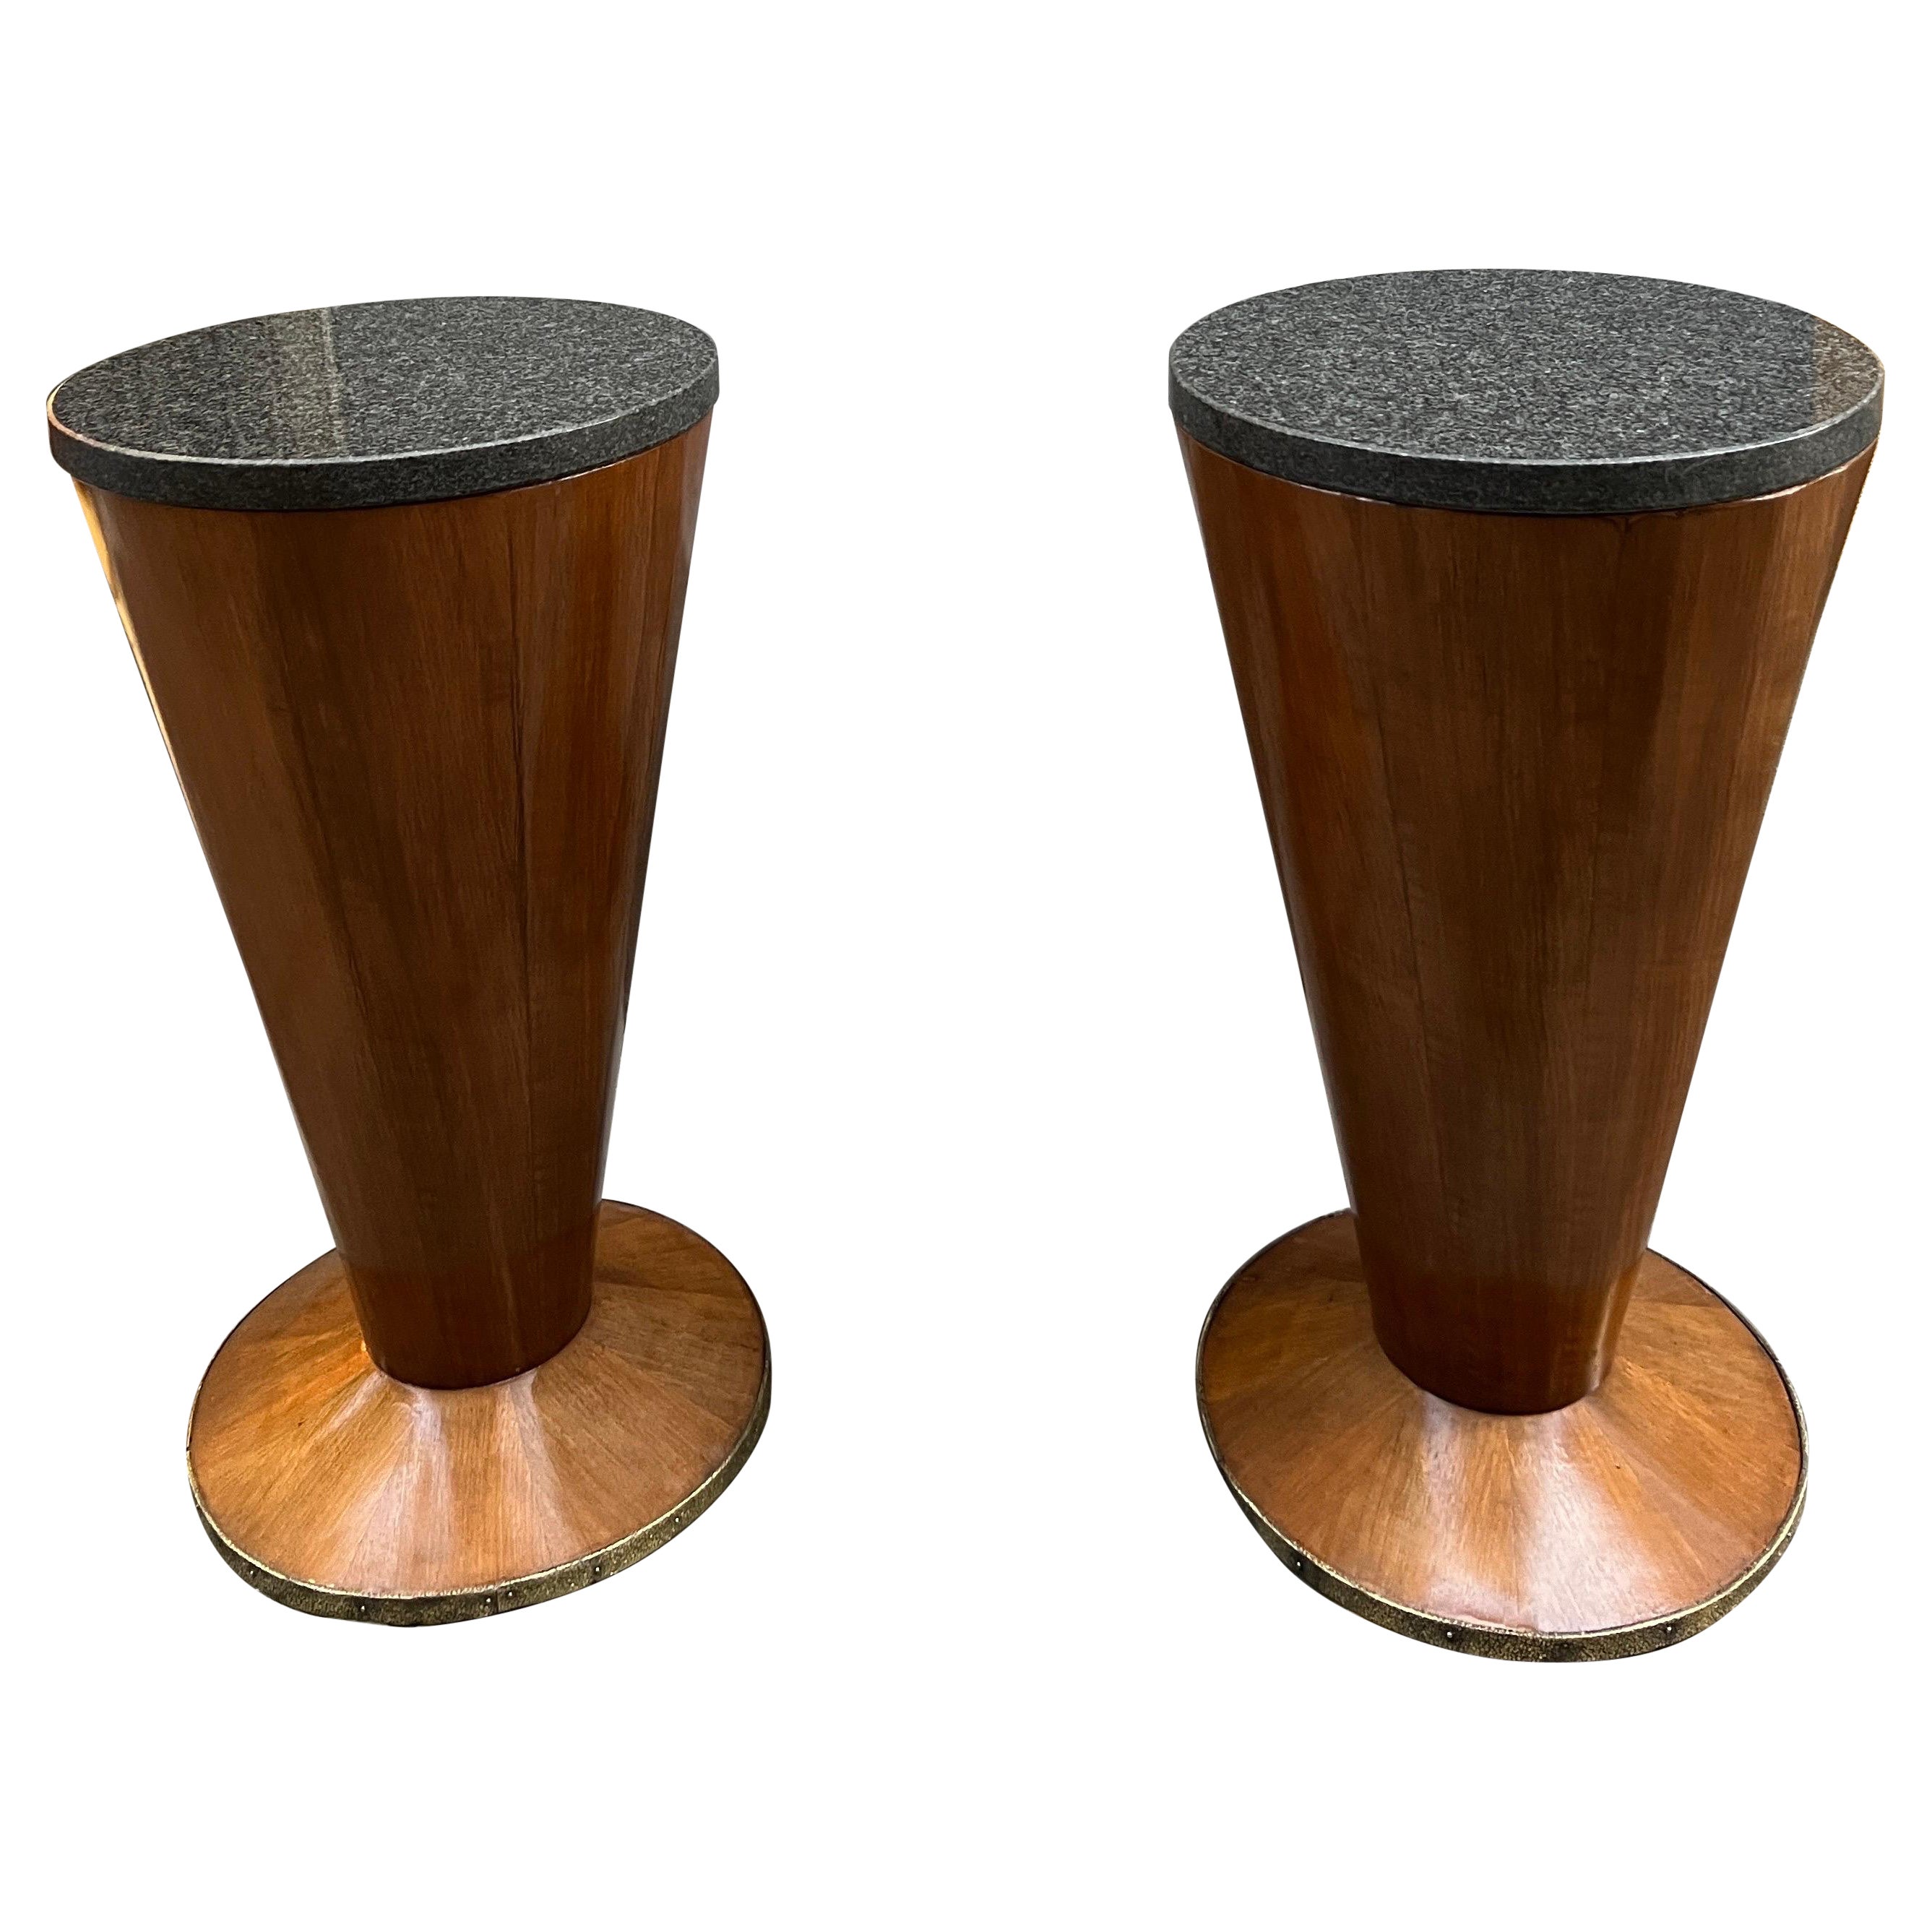 Pair of Art Deco Conical Cherry Wood Side Tables with Marble Top 1940s In Good Condition For Sale In Florence, IT